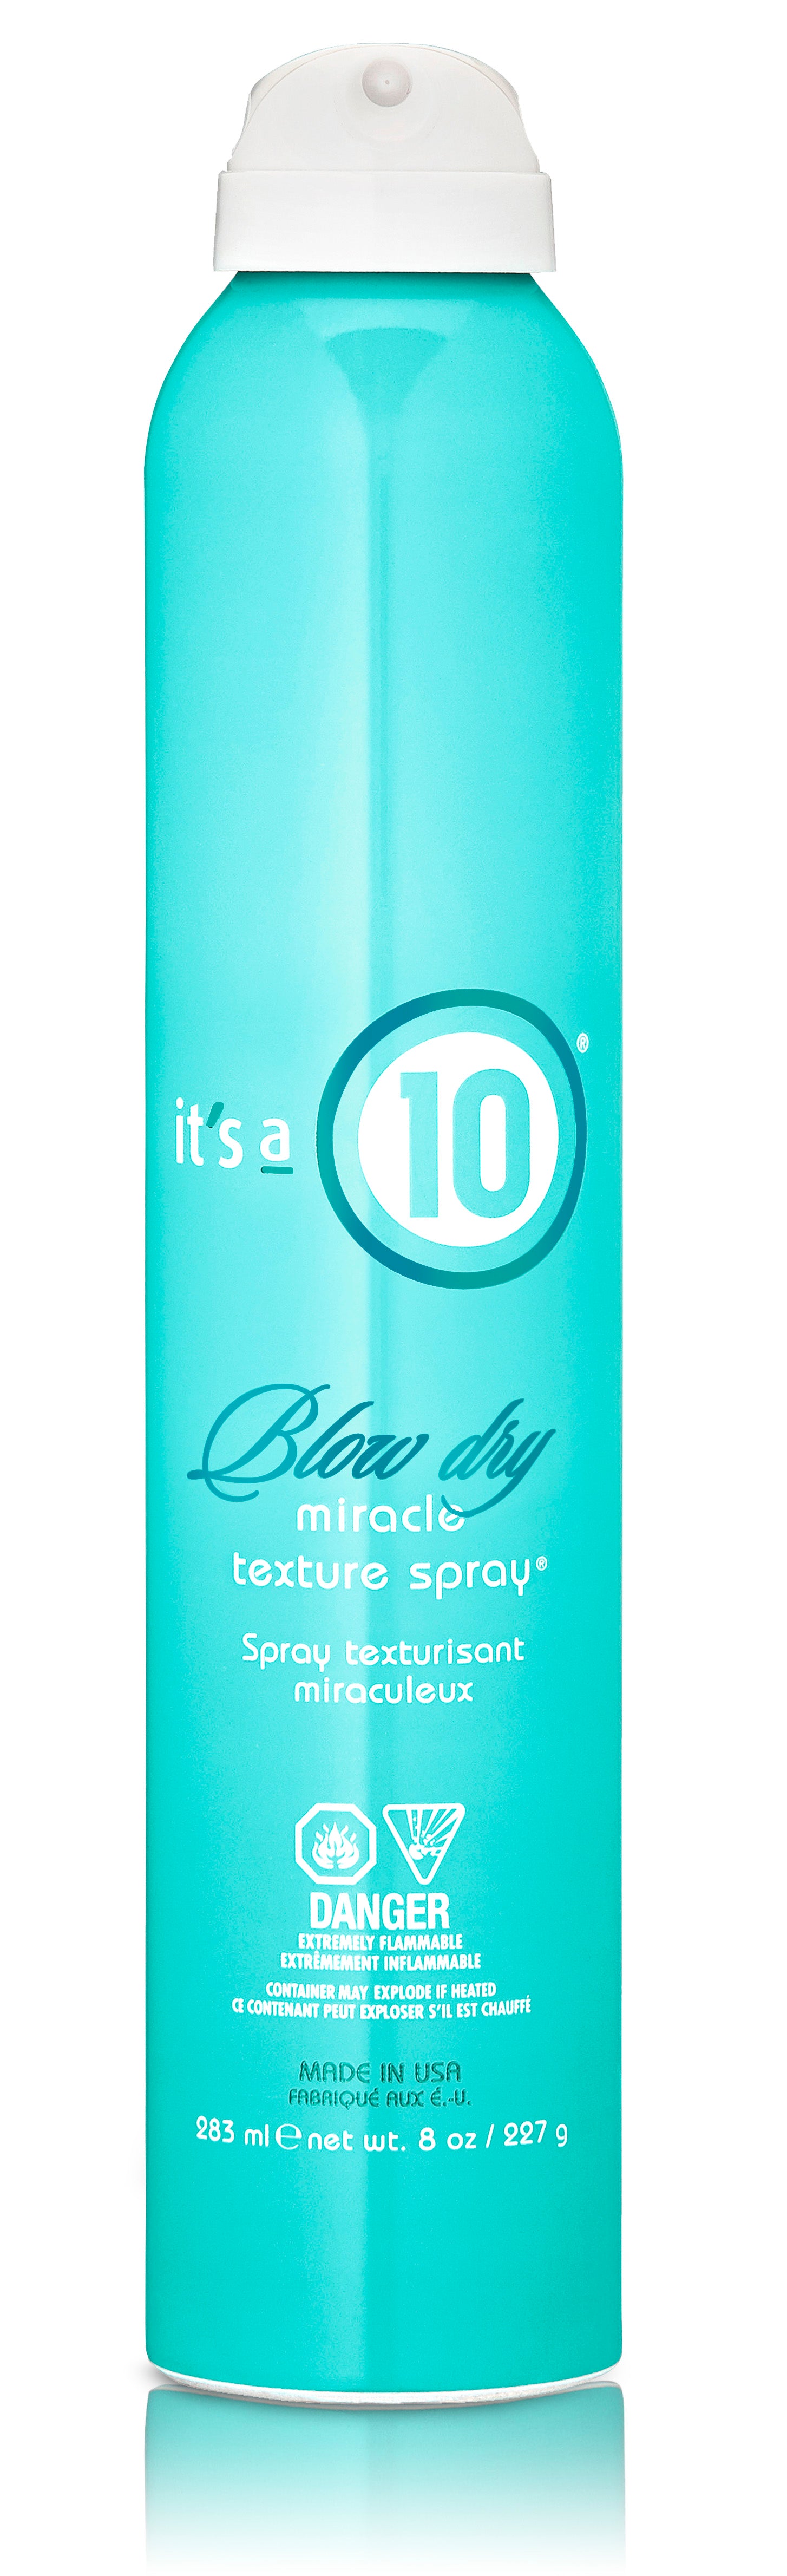 It's a 10 Miracle Blow Dry Texture Spray